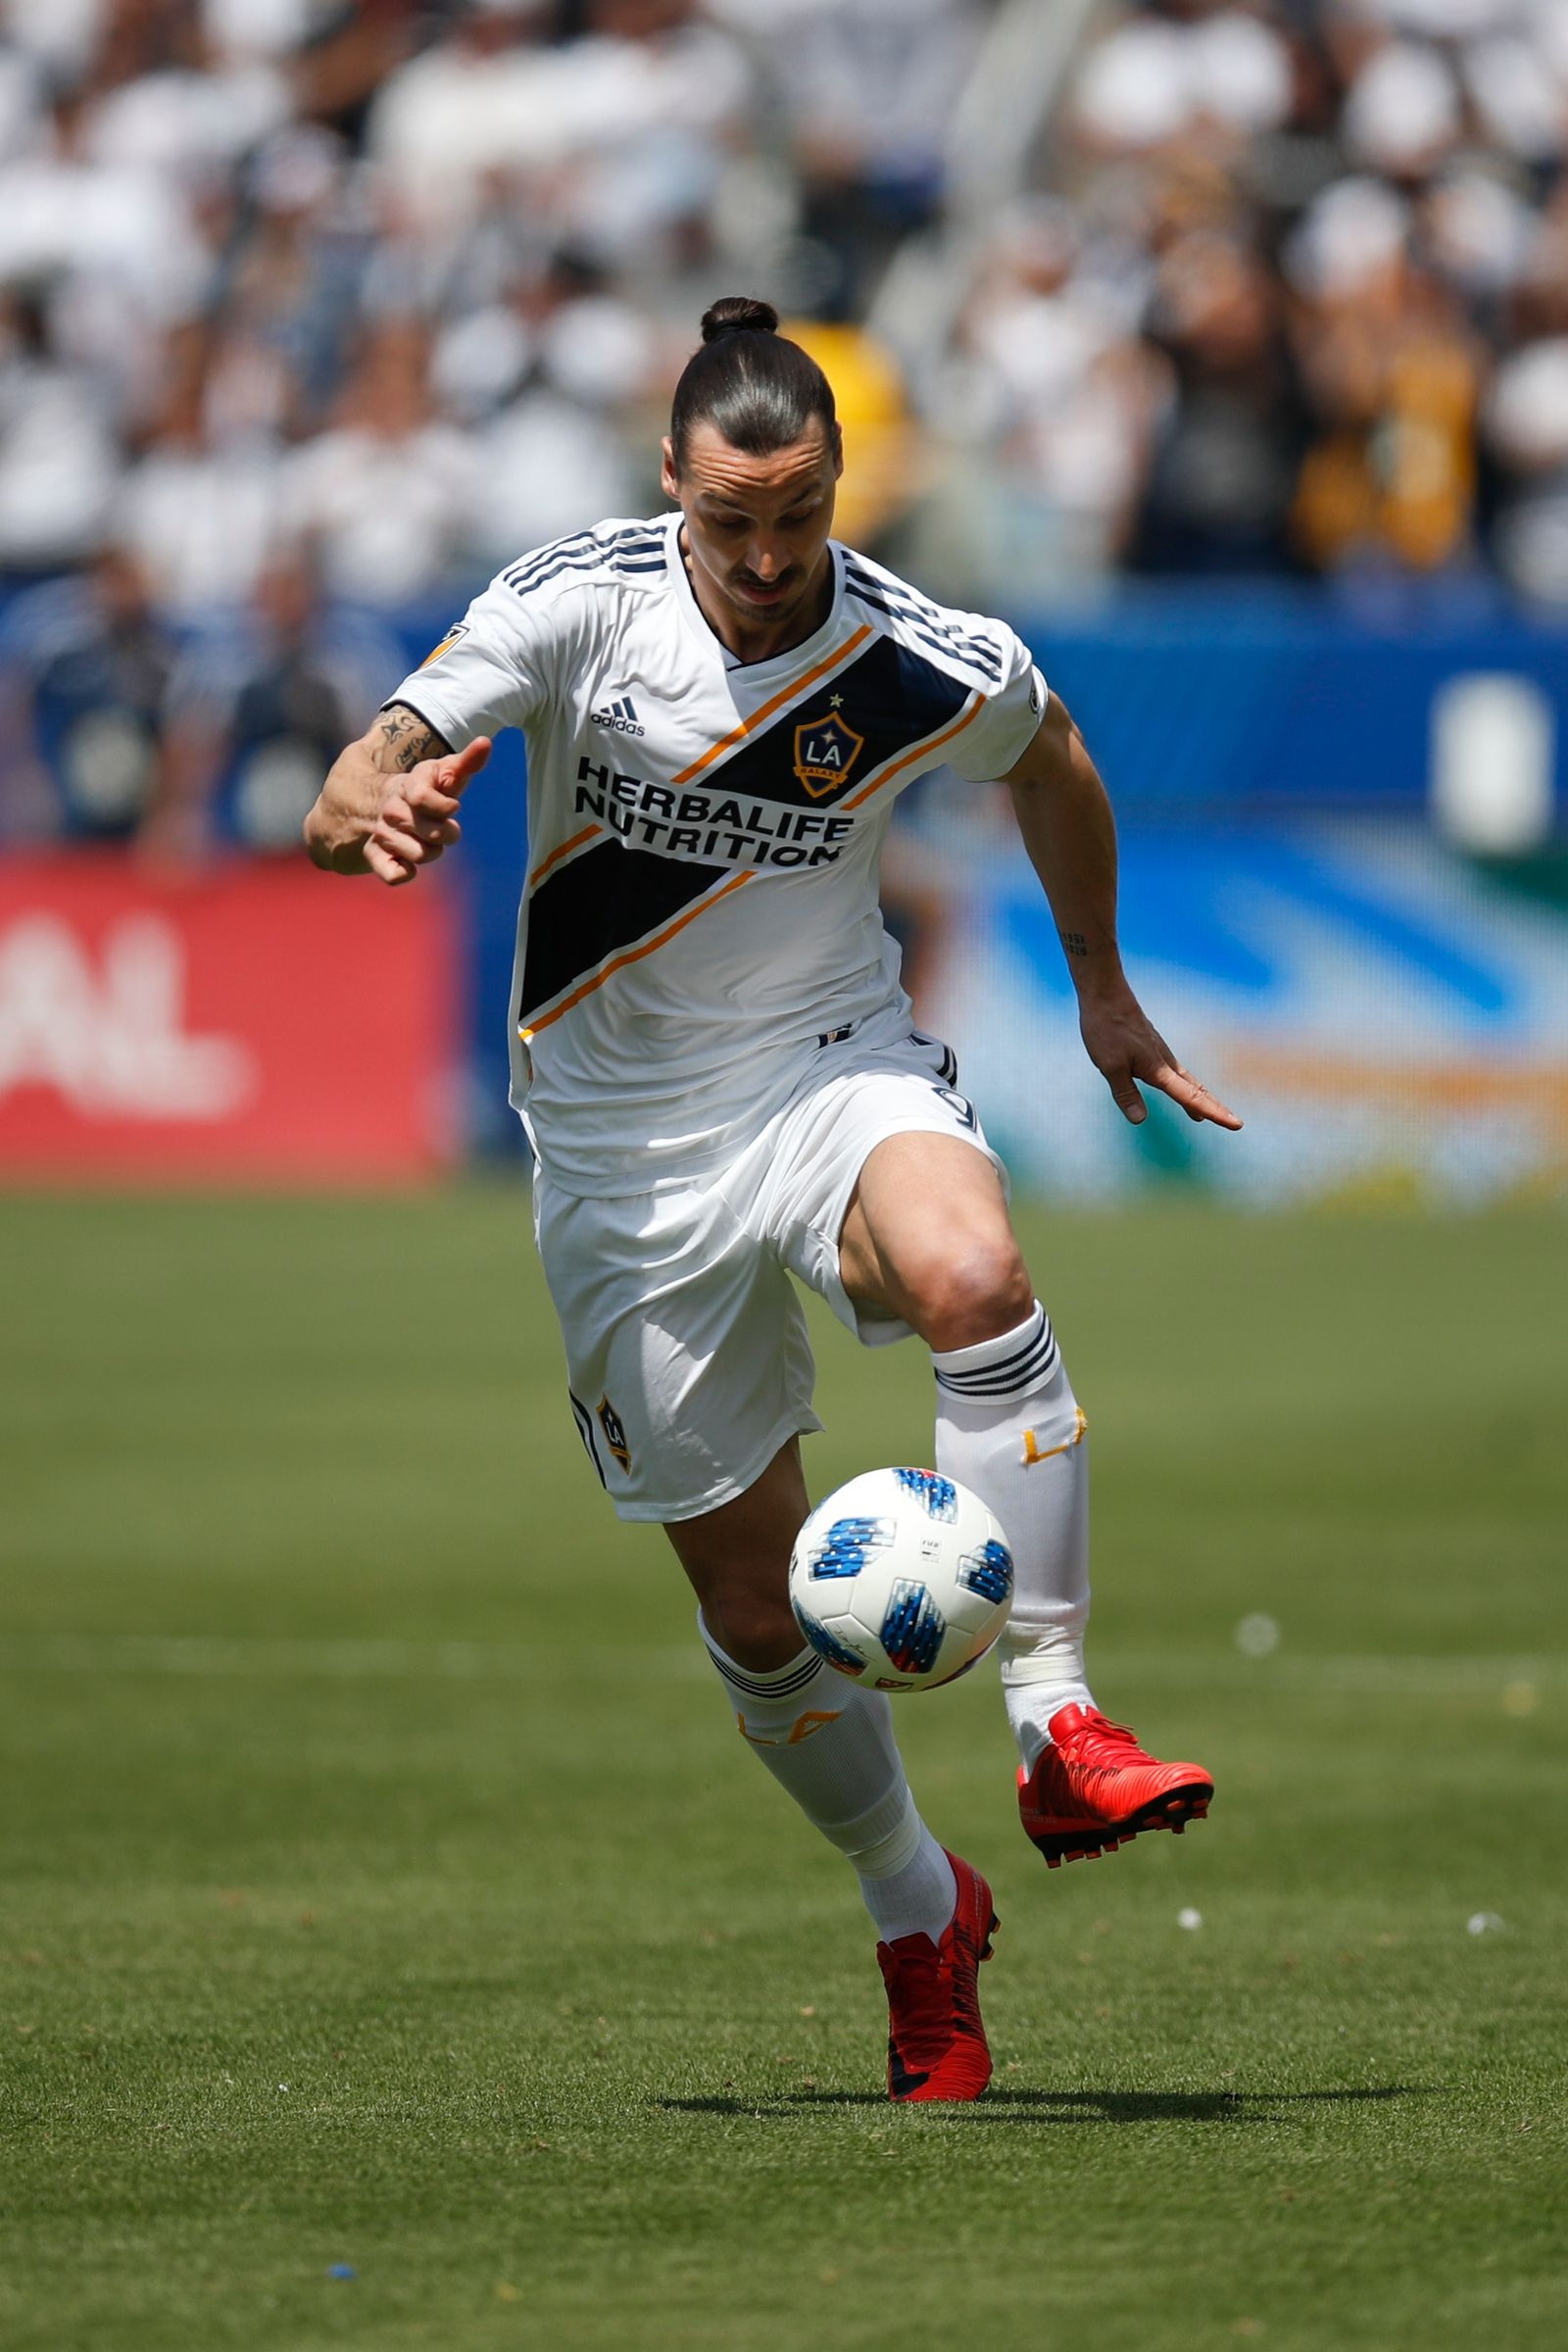 Los Angeles Galaxy's Zlatan Ibrahimovic, of Sweden, controls the ball during the second half of an MLS soccer match against the Los Angeles FC Saturday, March 31, 2018, in Carson, Calif. The Galaxy won 4-3. (AP Photo/Jae C. Hong)